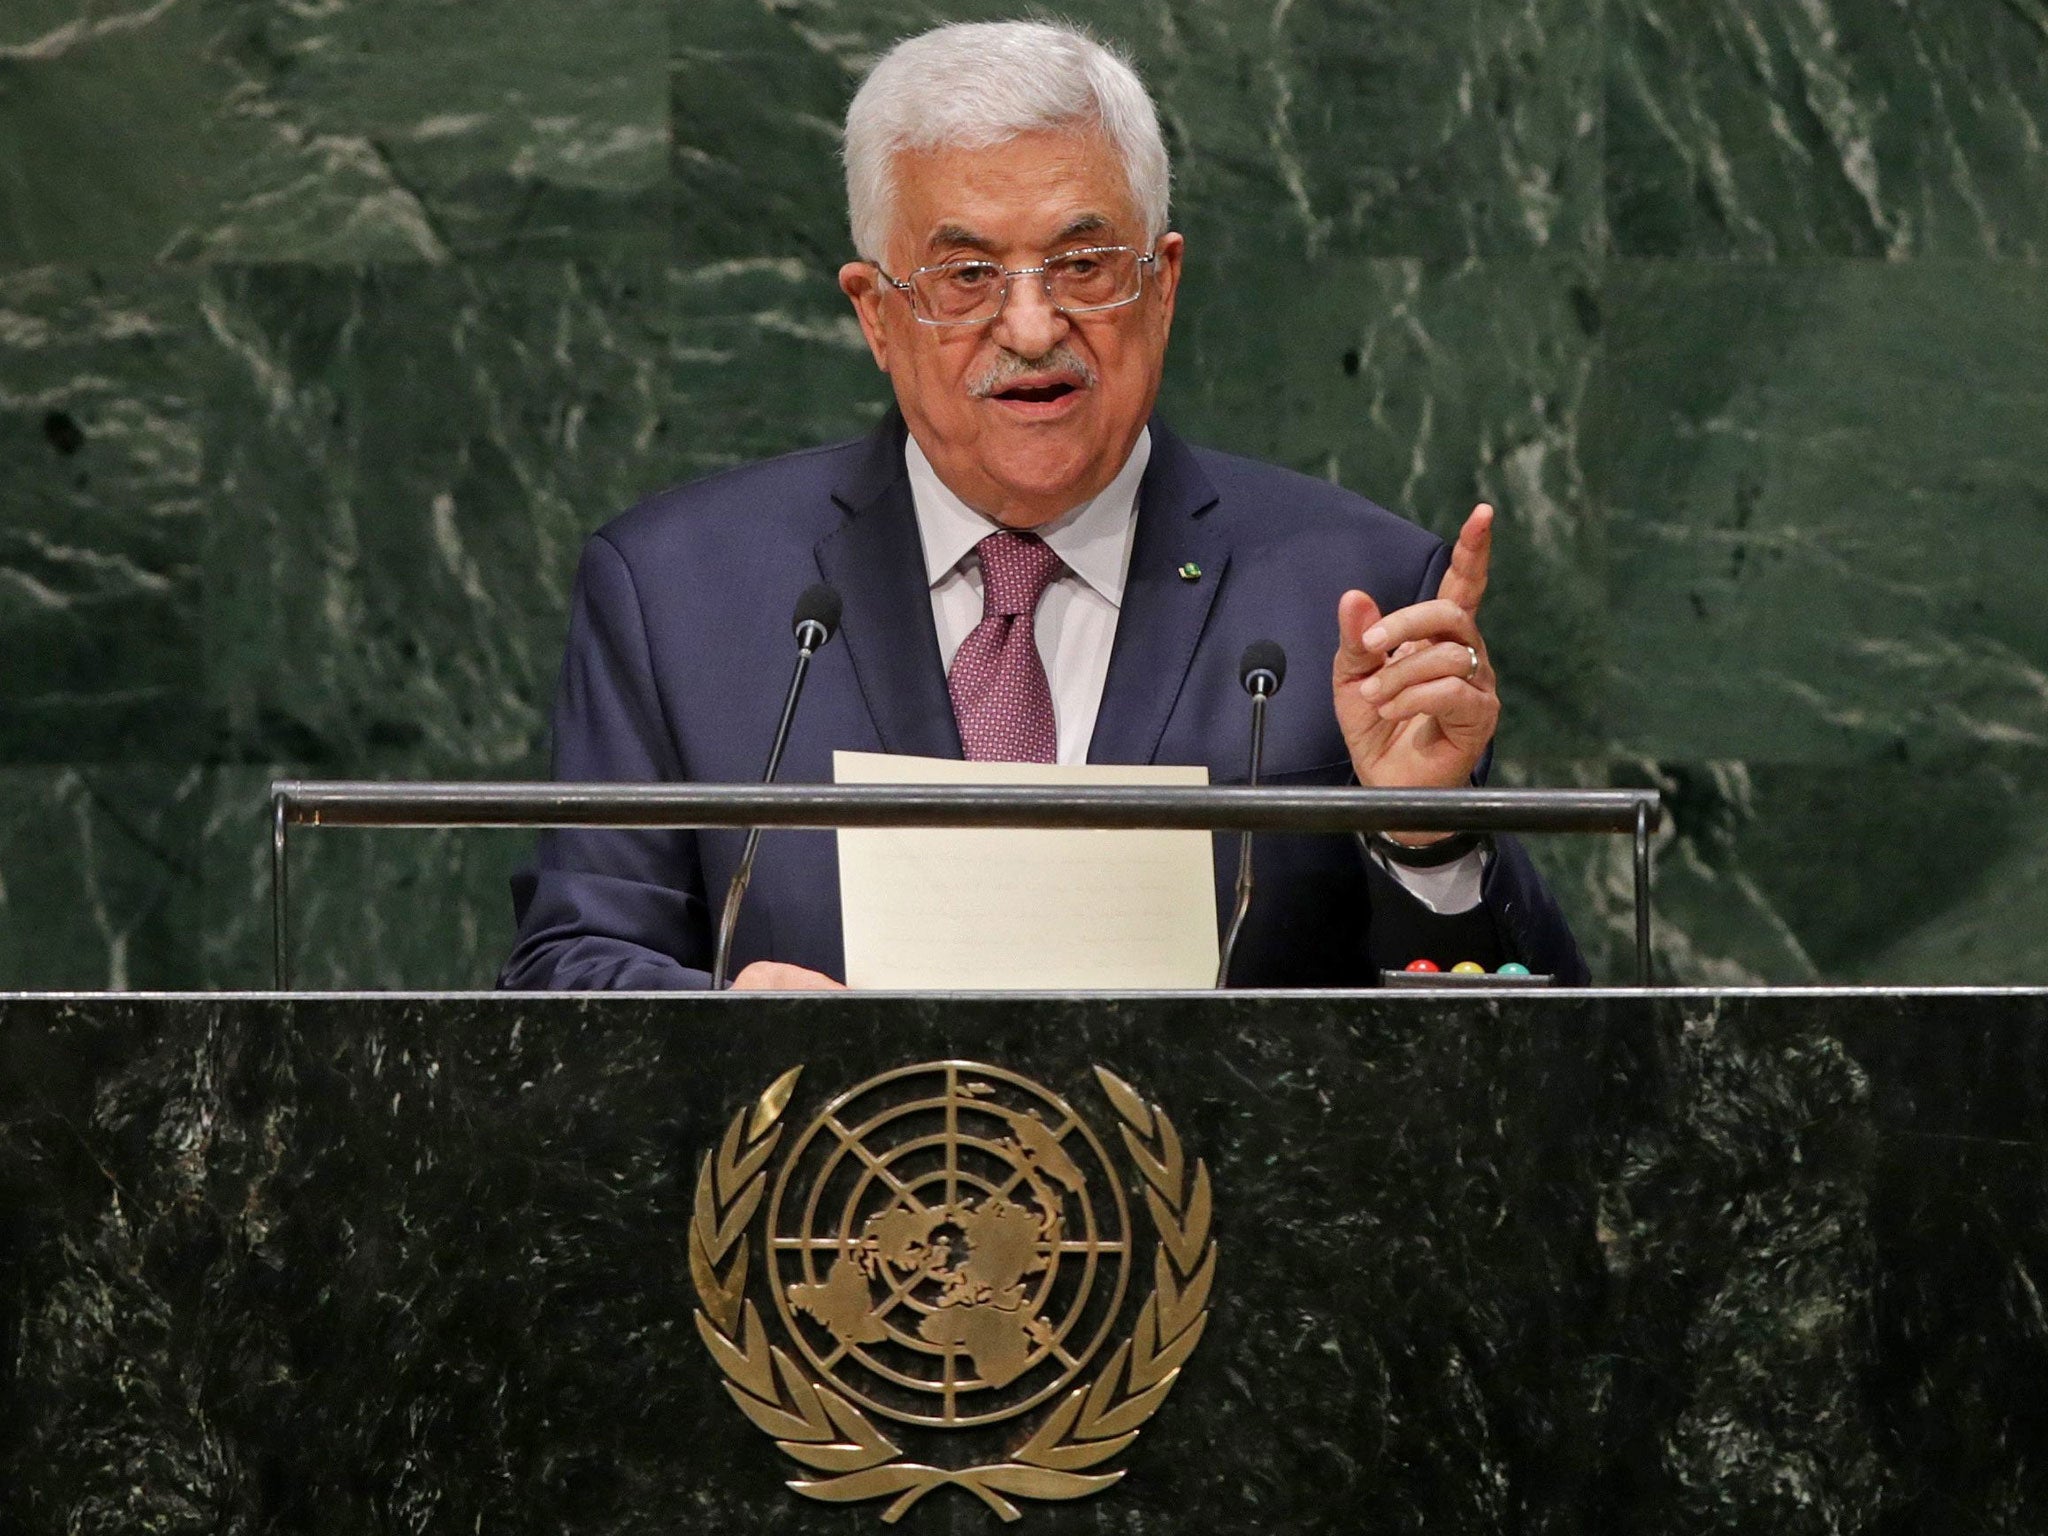 Palestinian President Mahmoud Abbas speaks during the 69th session of the United Nations General Assembly at United Nations headquarters in New York